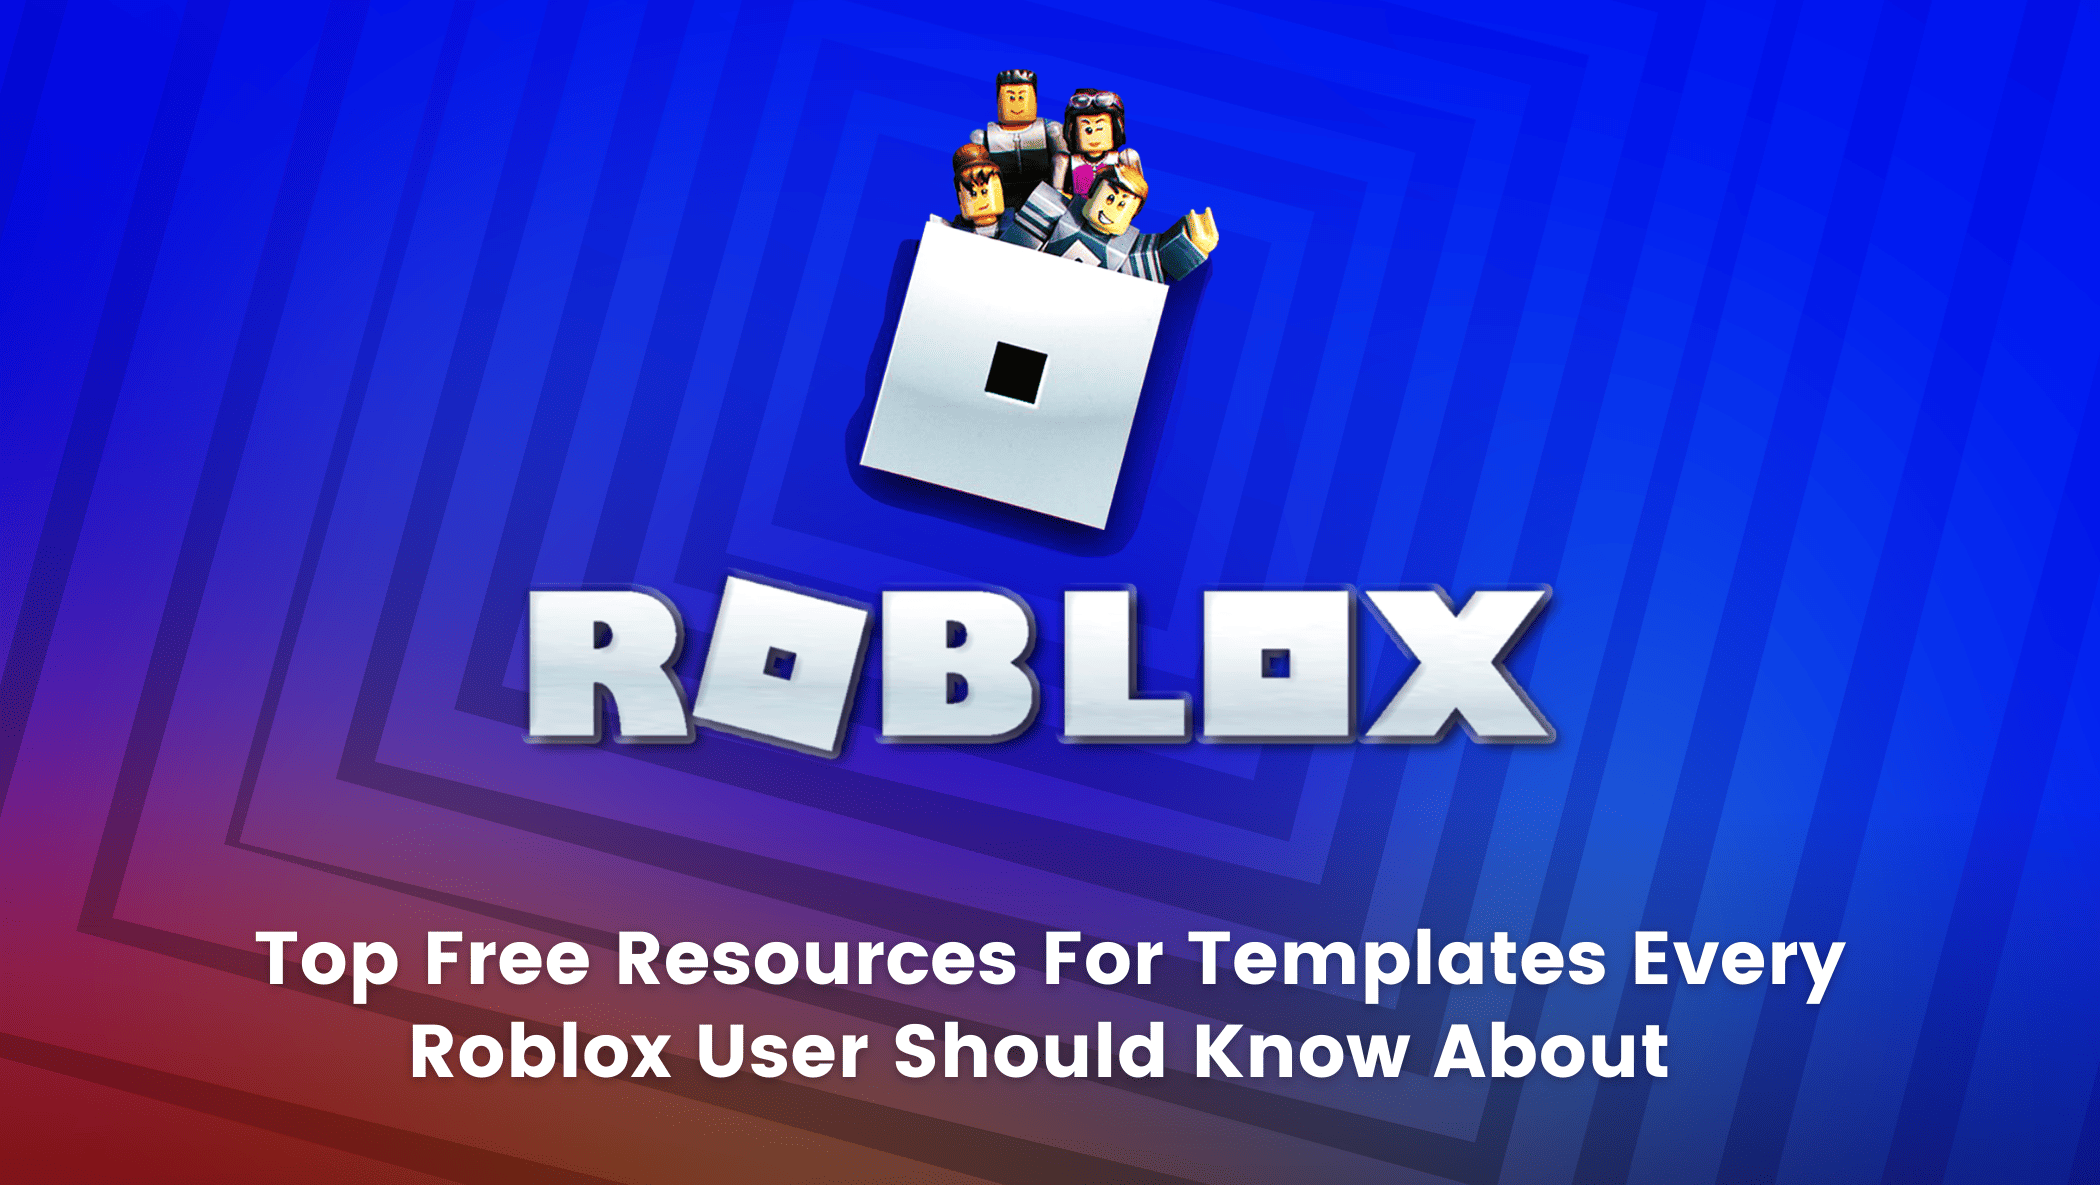 Top Free Resources For Templates Every Roblox User Should Know About -  BrightChamps Blog